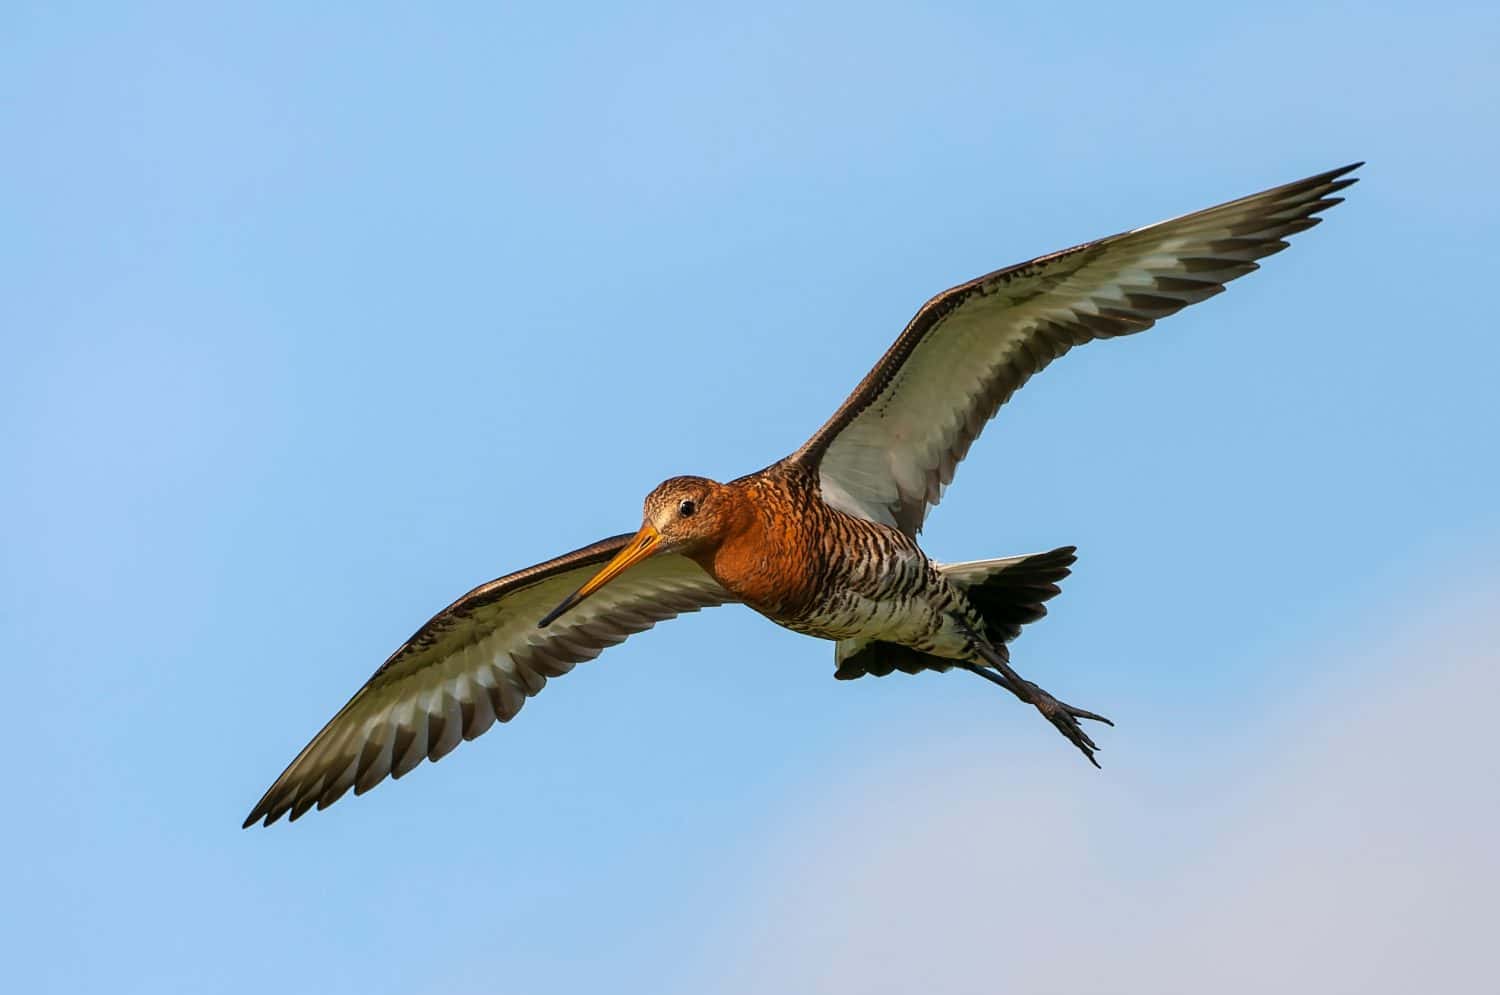 Black-tailed Godwit (Limosa limosa) in the Netherlands.